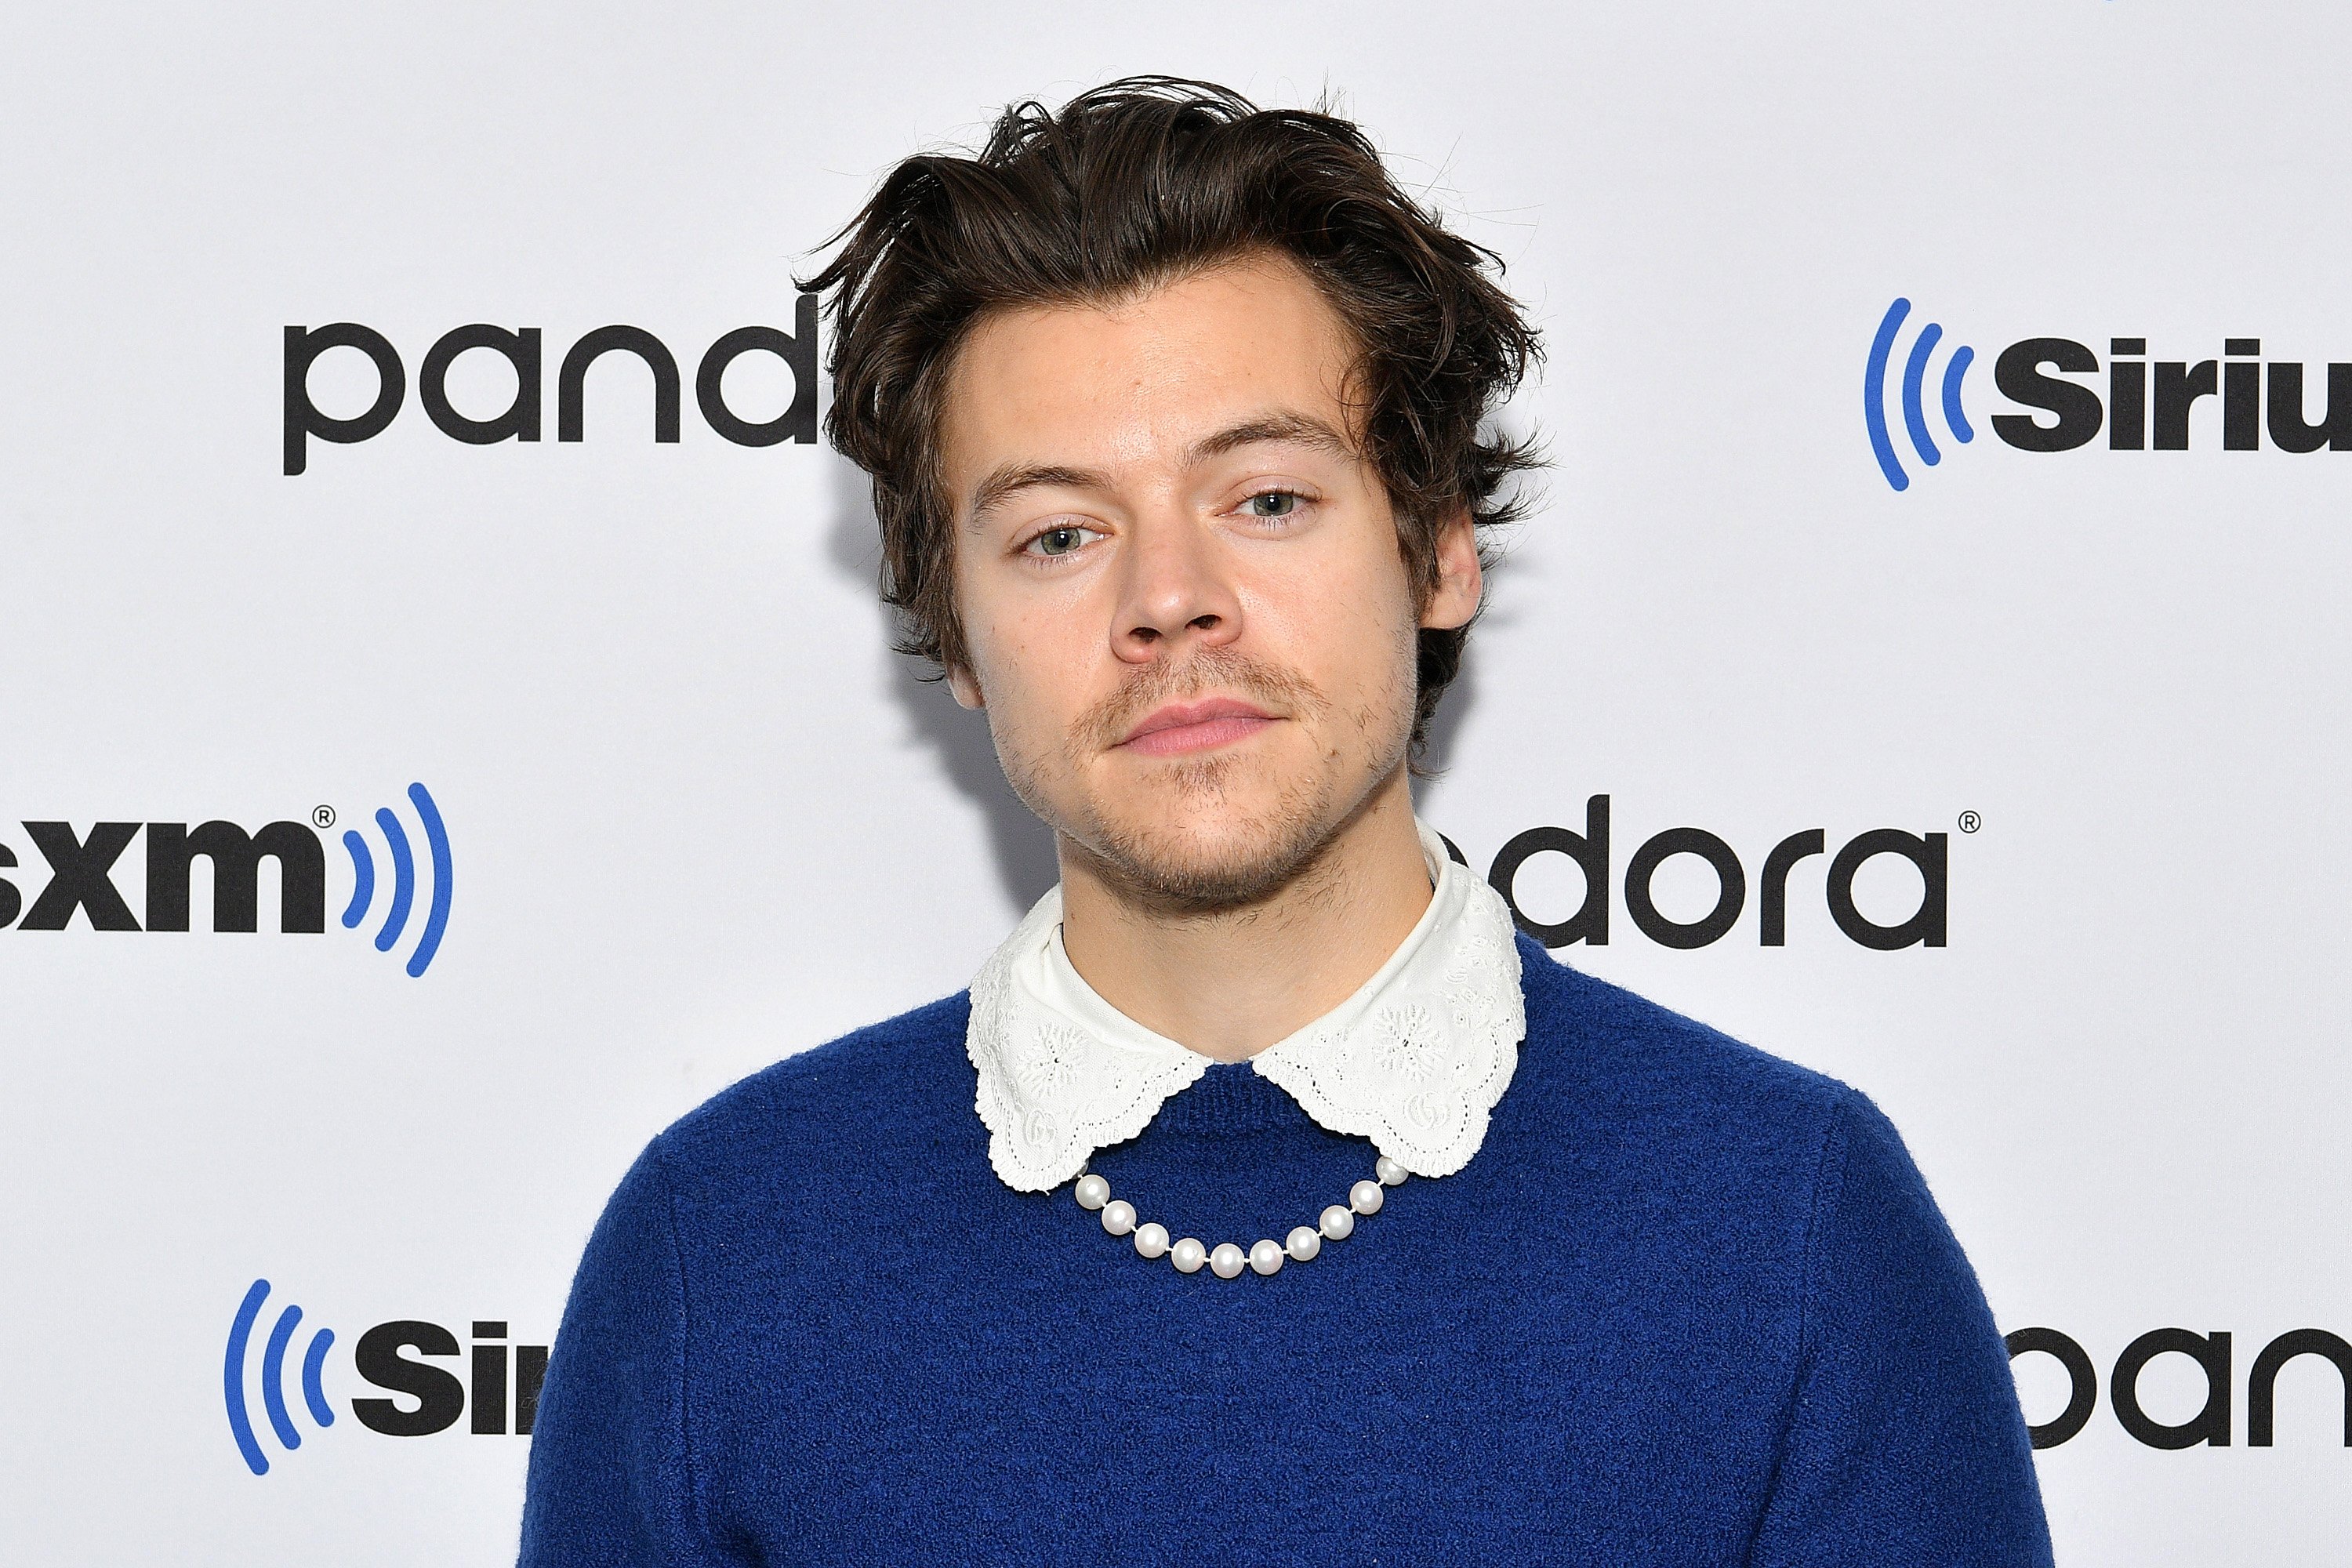 Harry Styles wearing a blue shirt in front of a white background